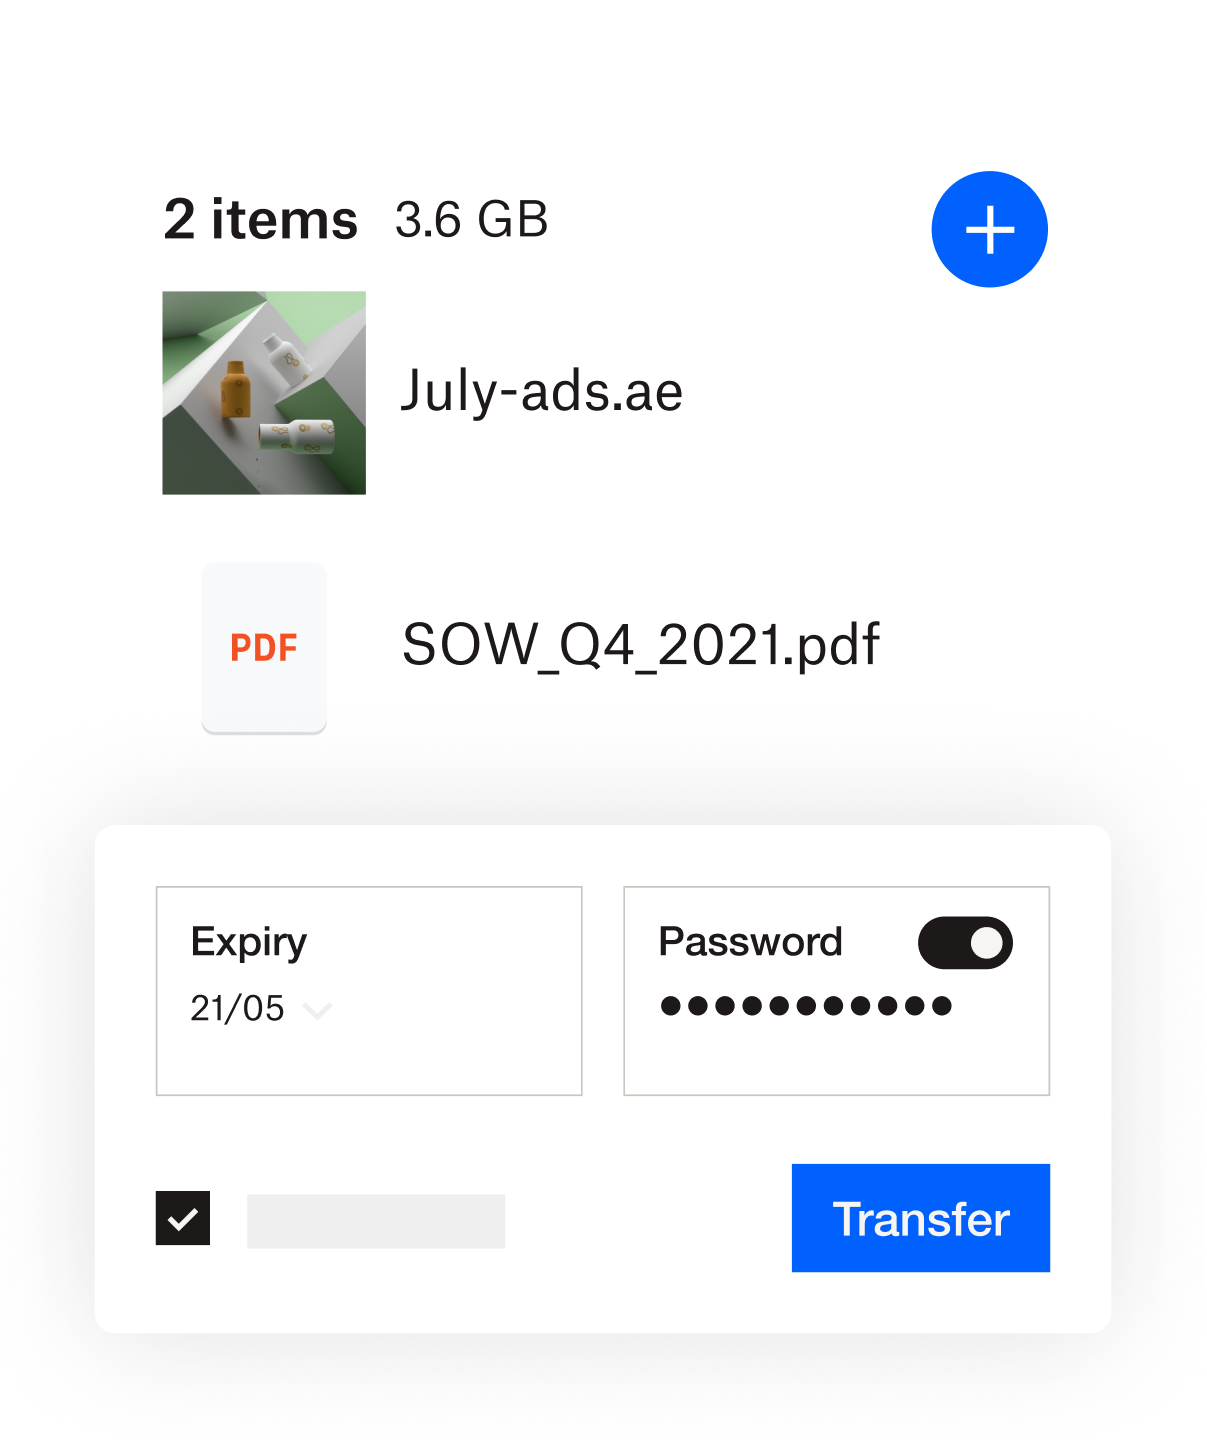 The Dropbox interface where an expiry date and password can be added to a file